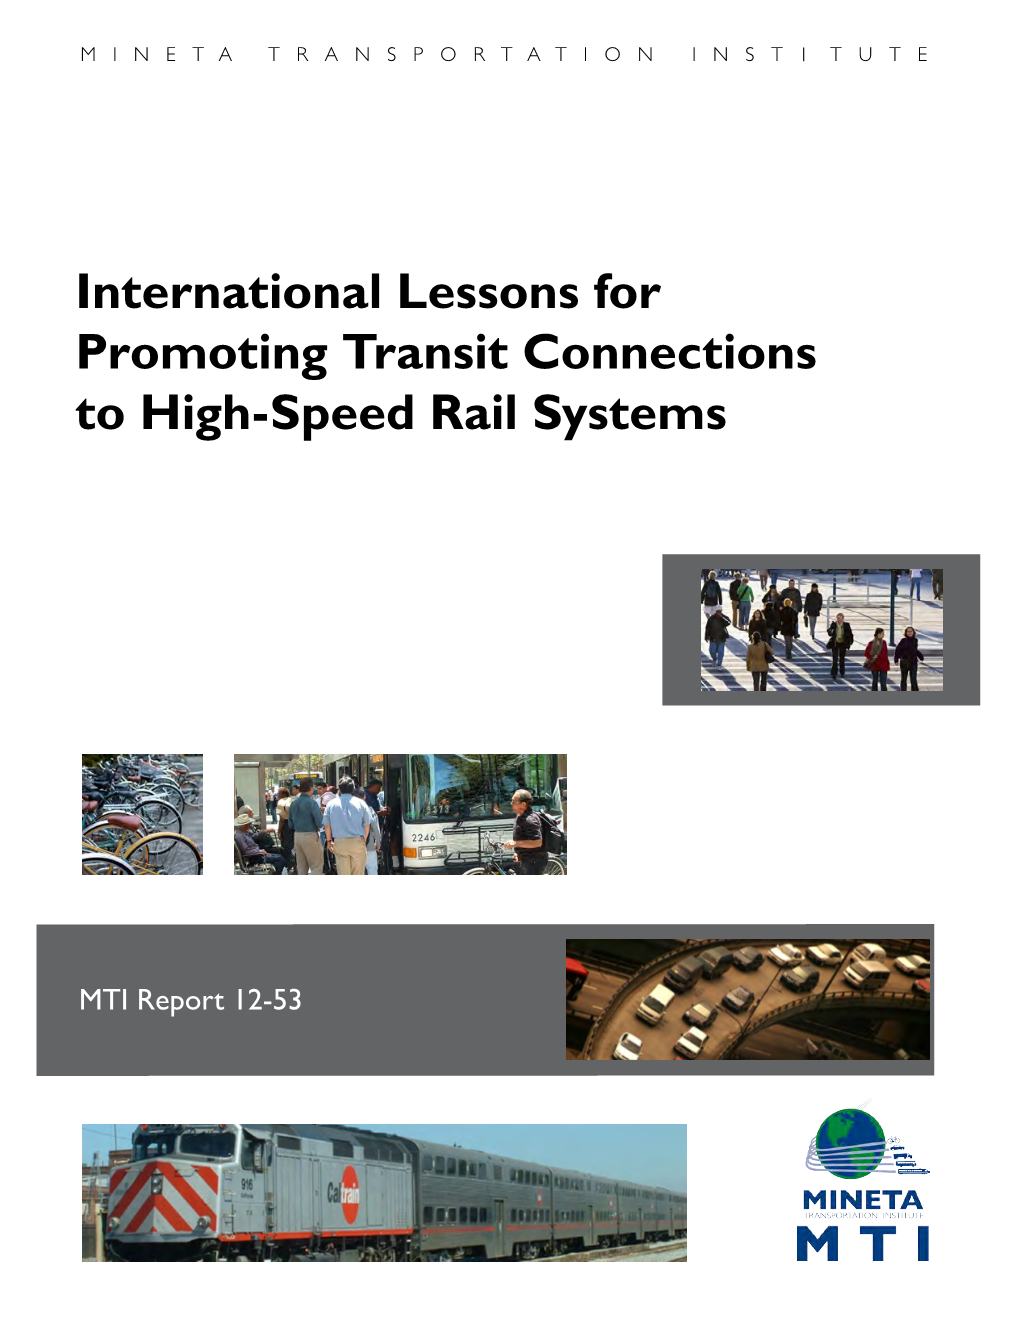 International Lessons for Promoting Transit Connections to High-Speed Rail Systems